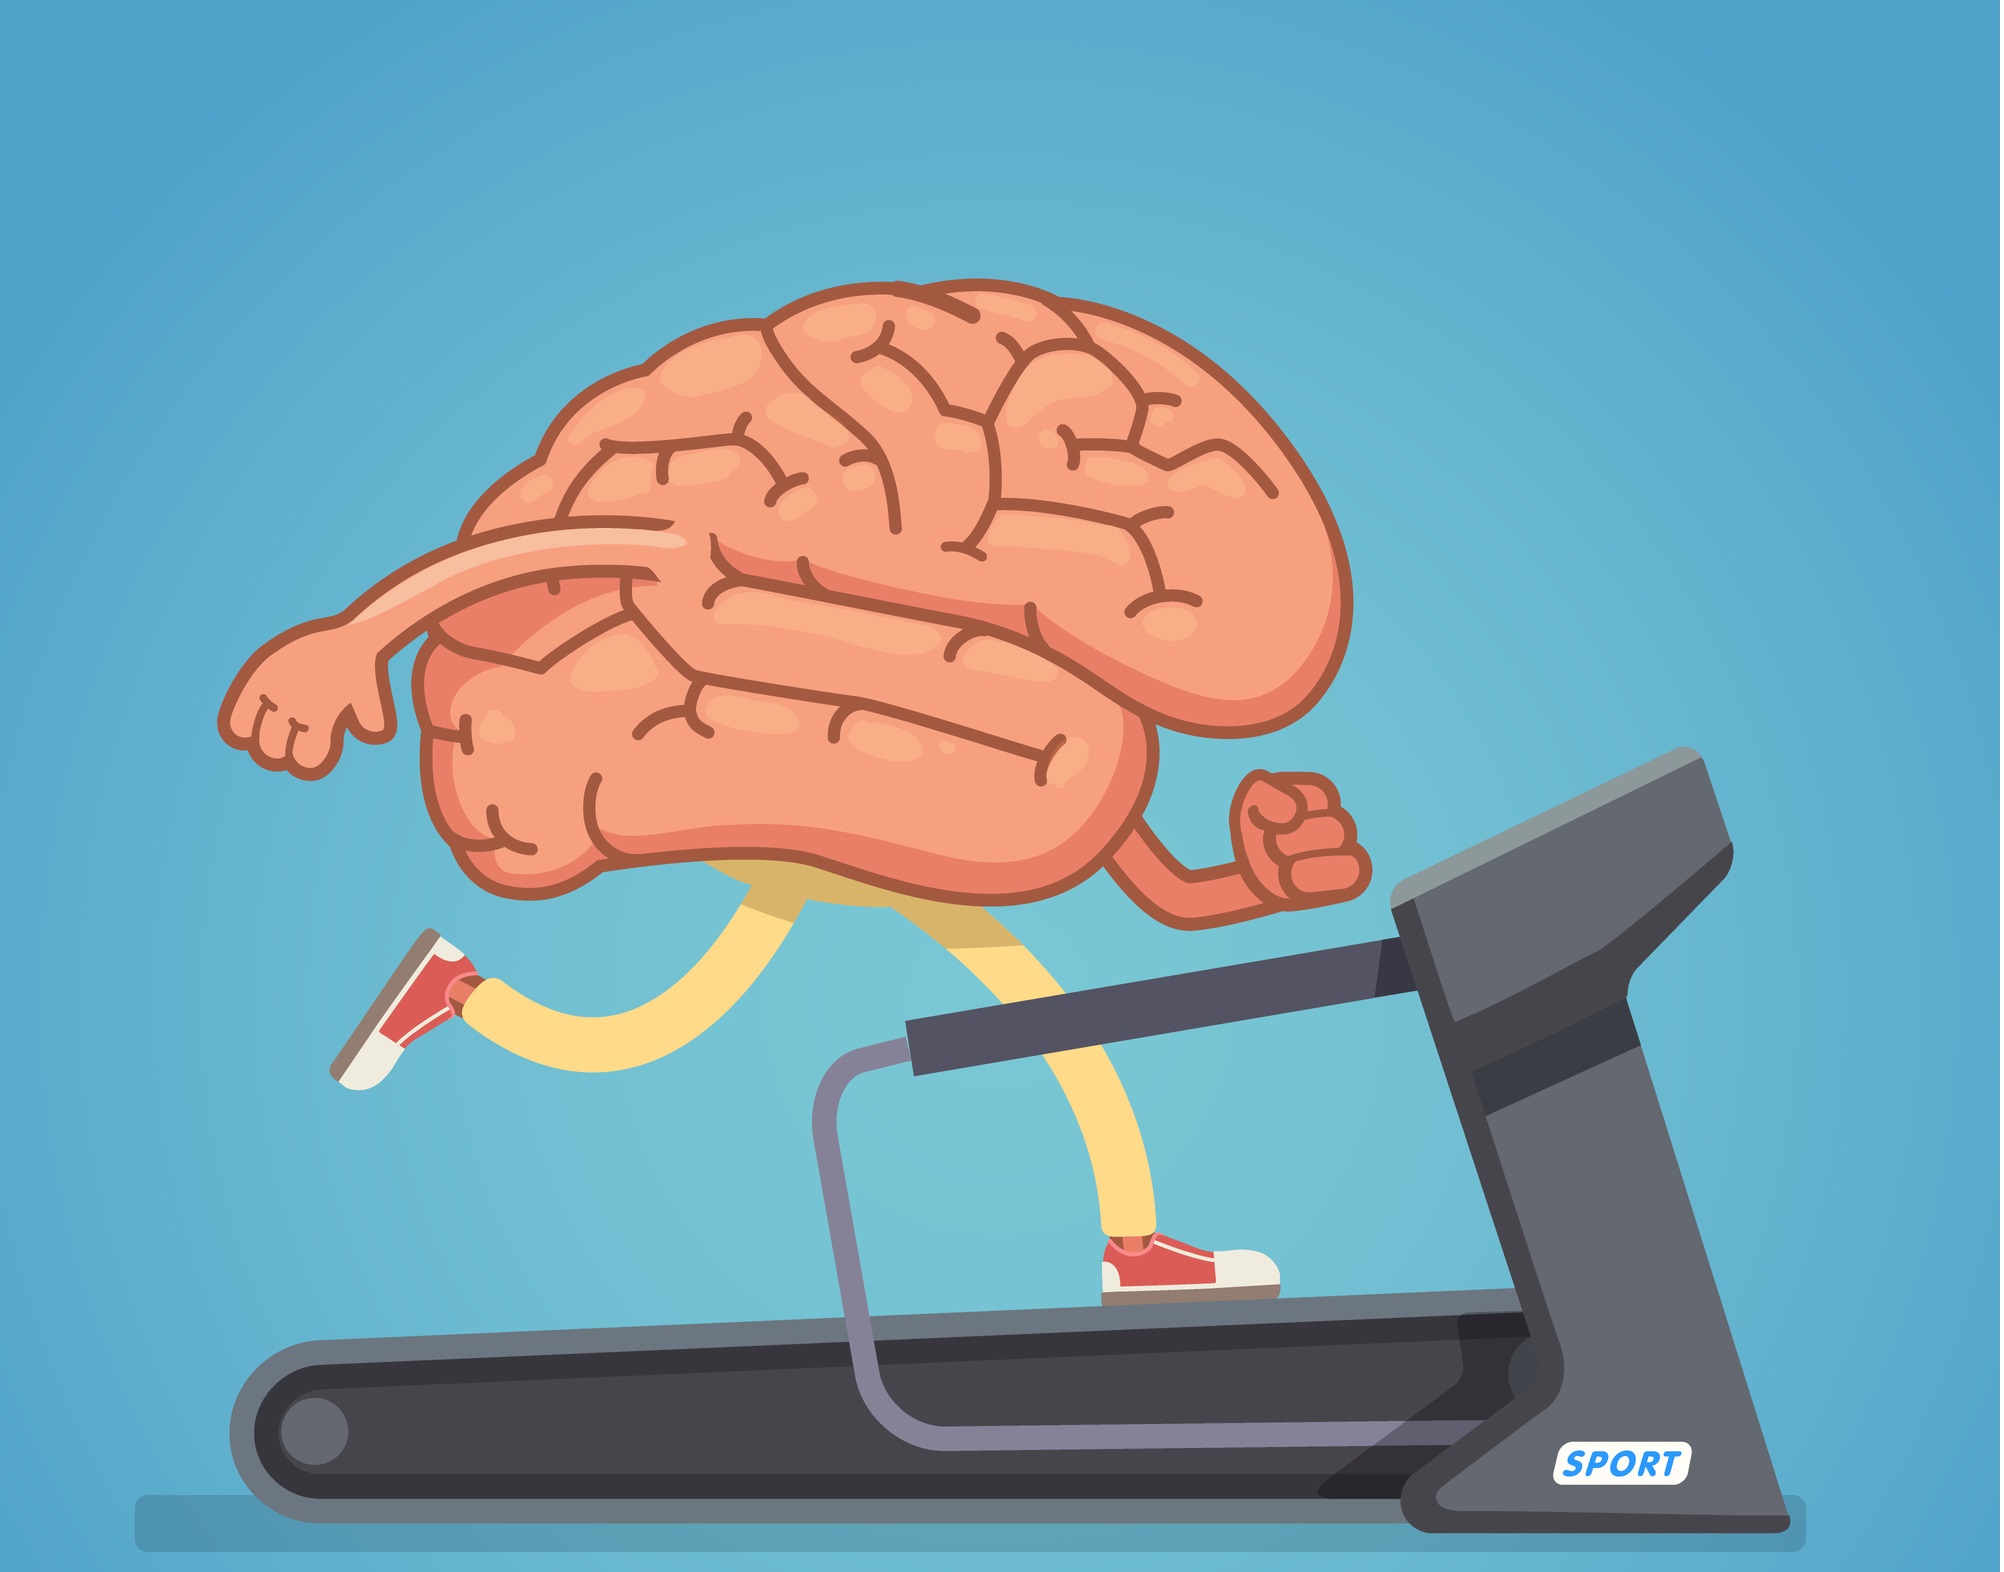 Brain working out on treadmill. Education concept